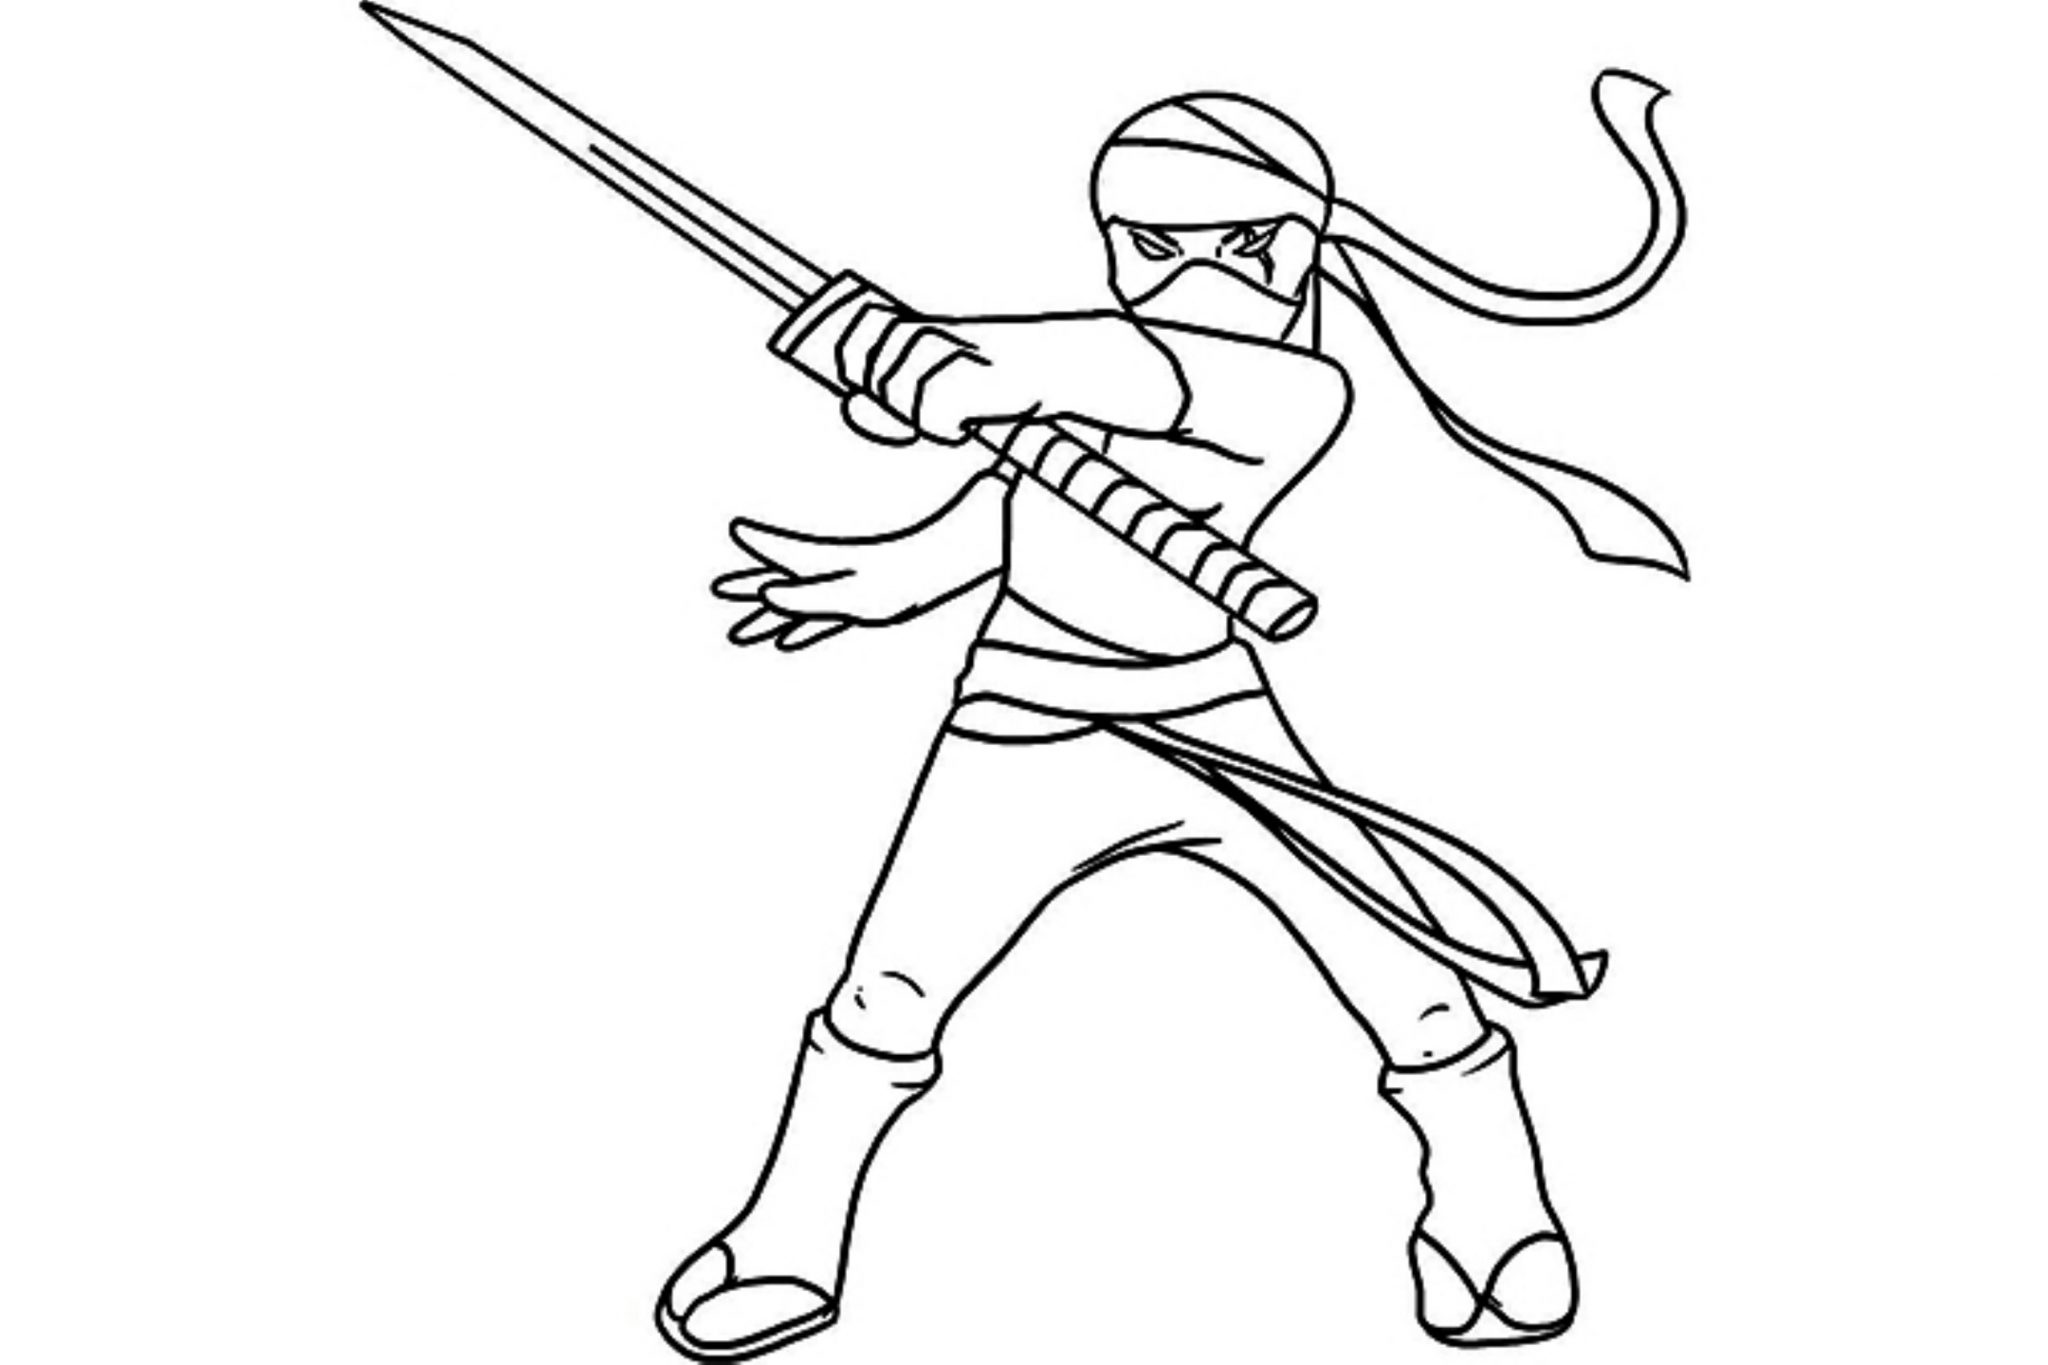 Ninja Coloring Pages Kids Skills Development Creative Sketch Coloring Page